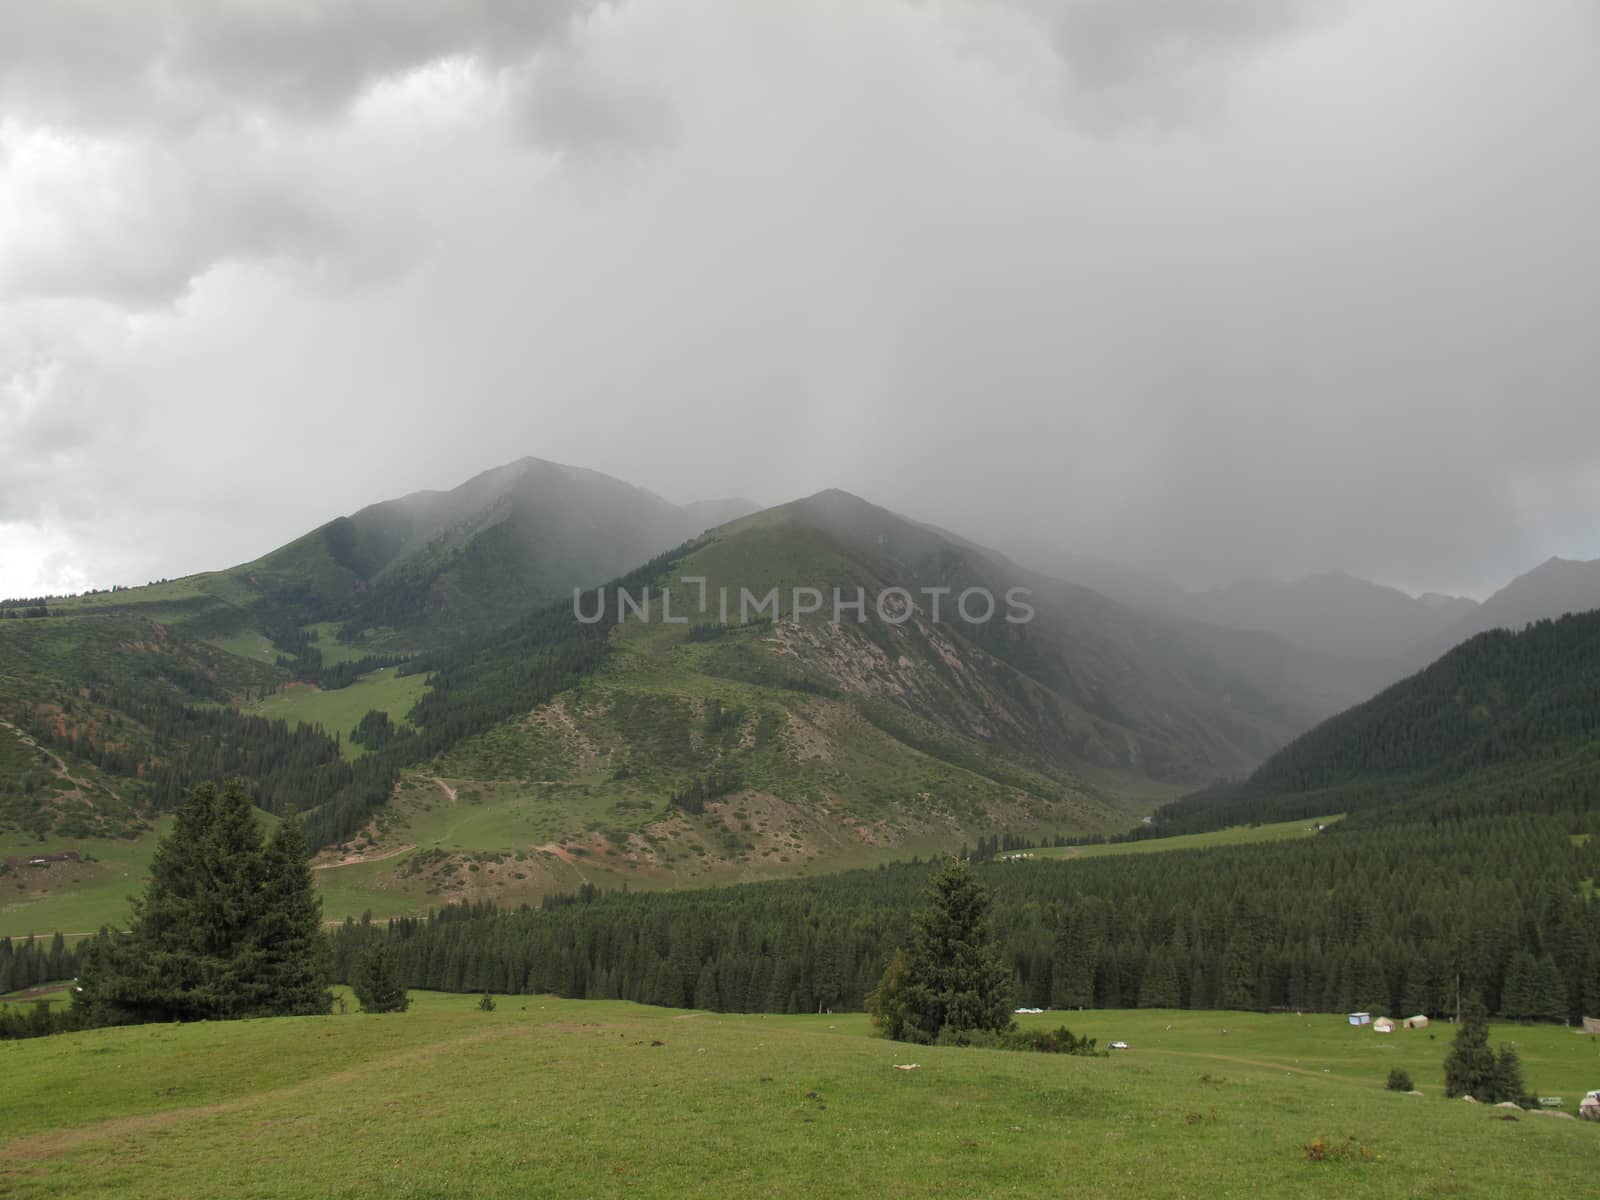 heavy rain far in the mountains and coniferous forest with dark clouds                